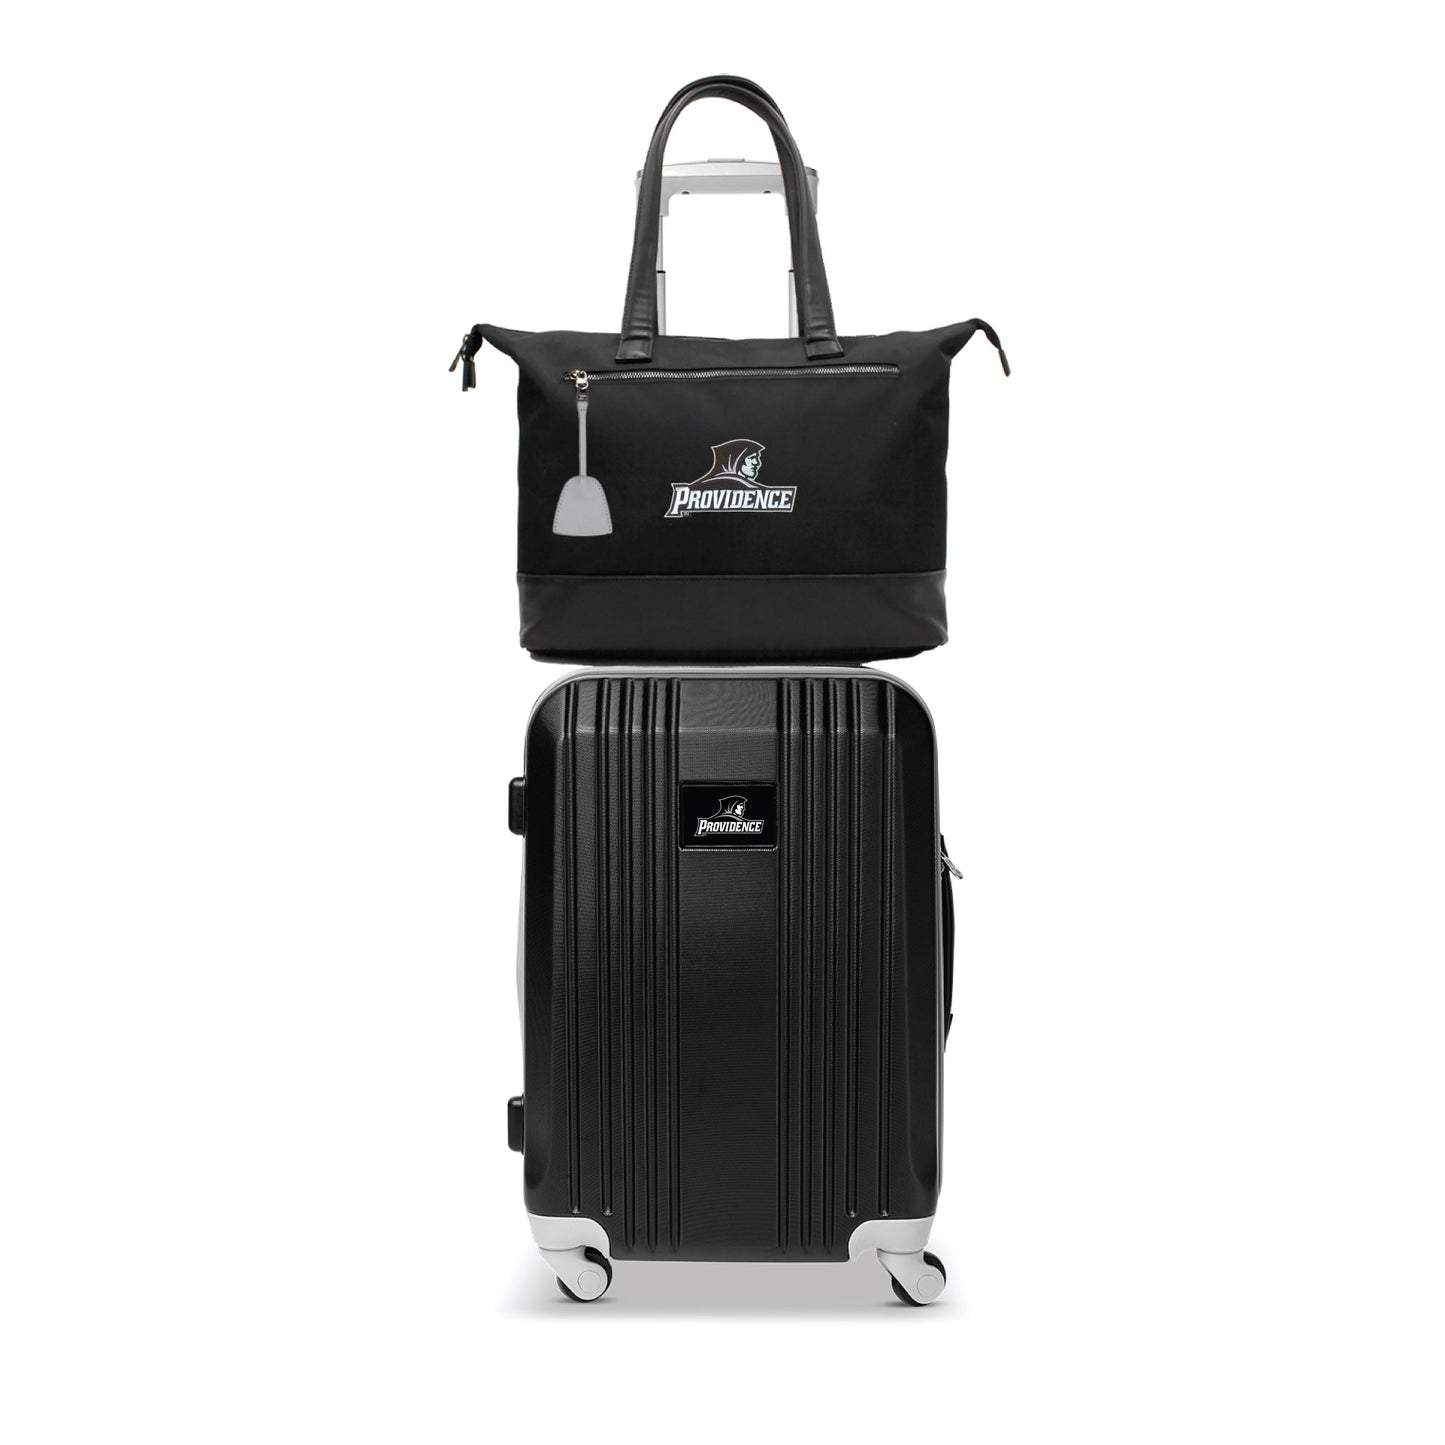 Providence College Premium Laptop Tote Bag and Luggage Set